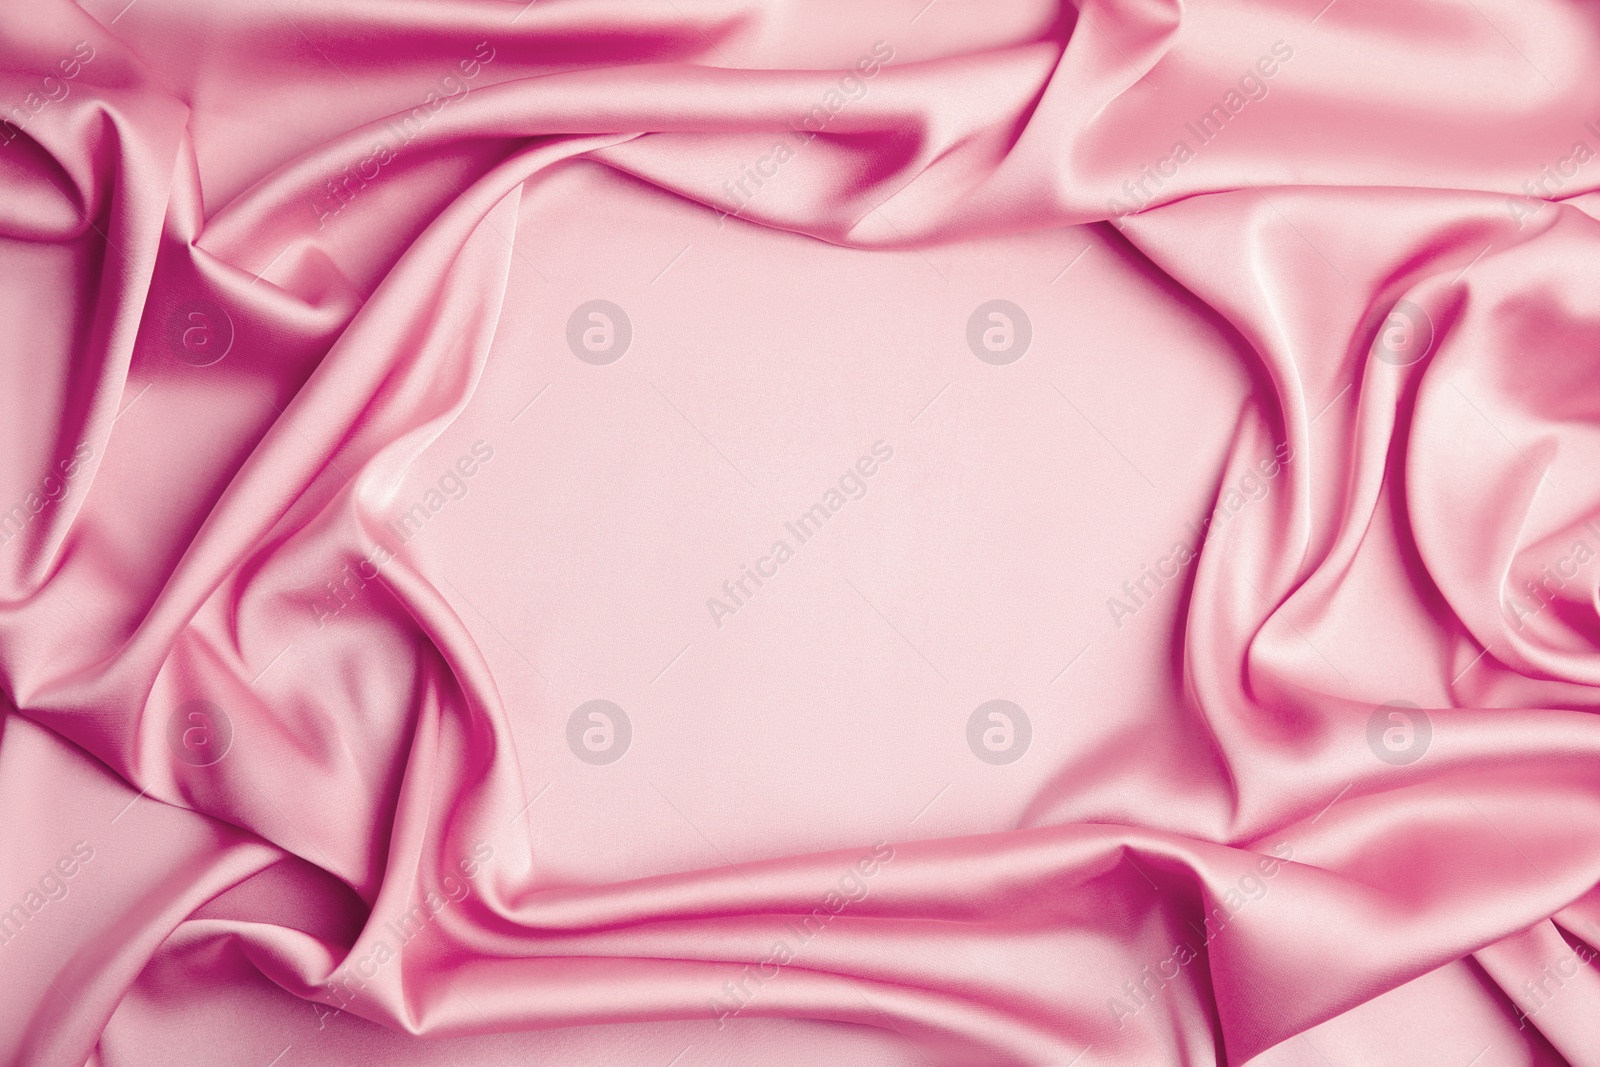 Image of Crumpled pink silk fabric as background, top view. Space for text